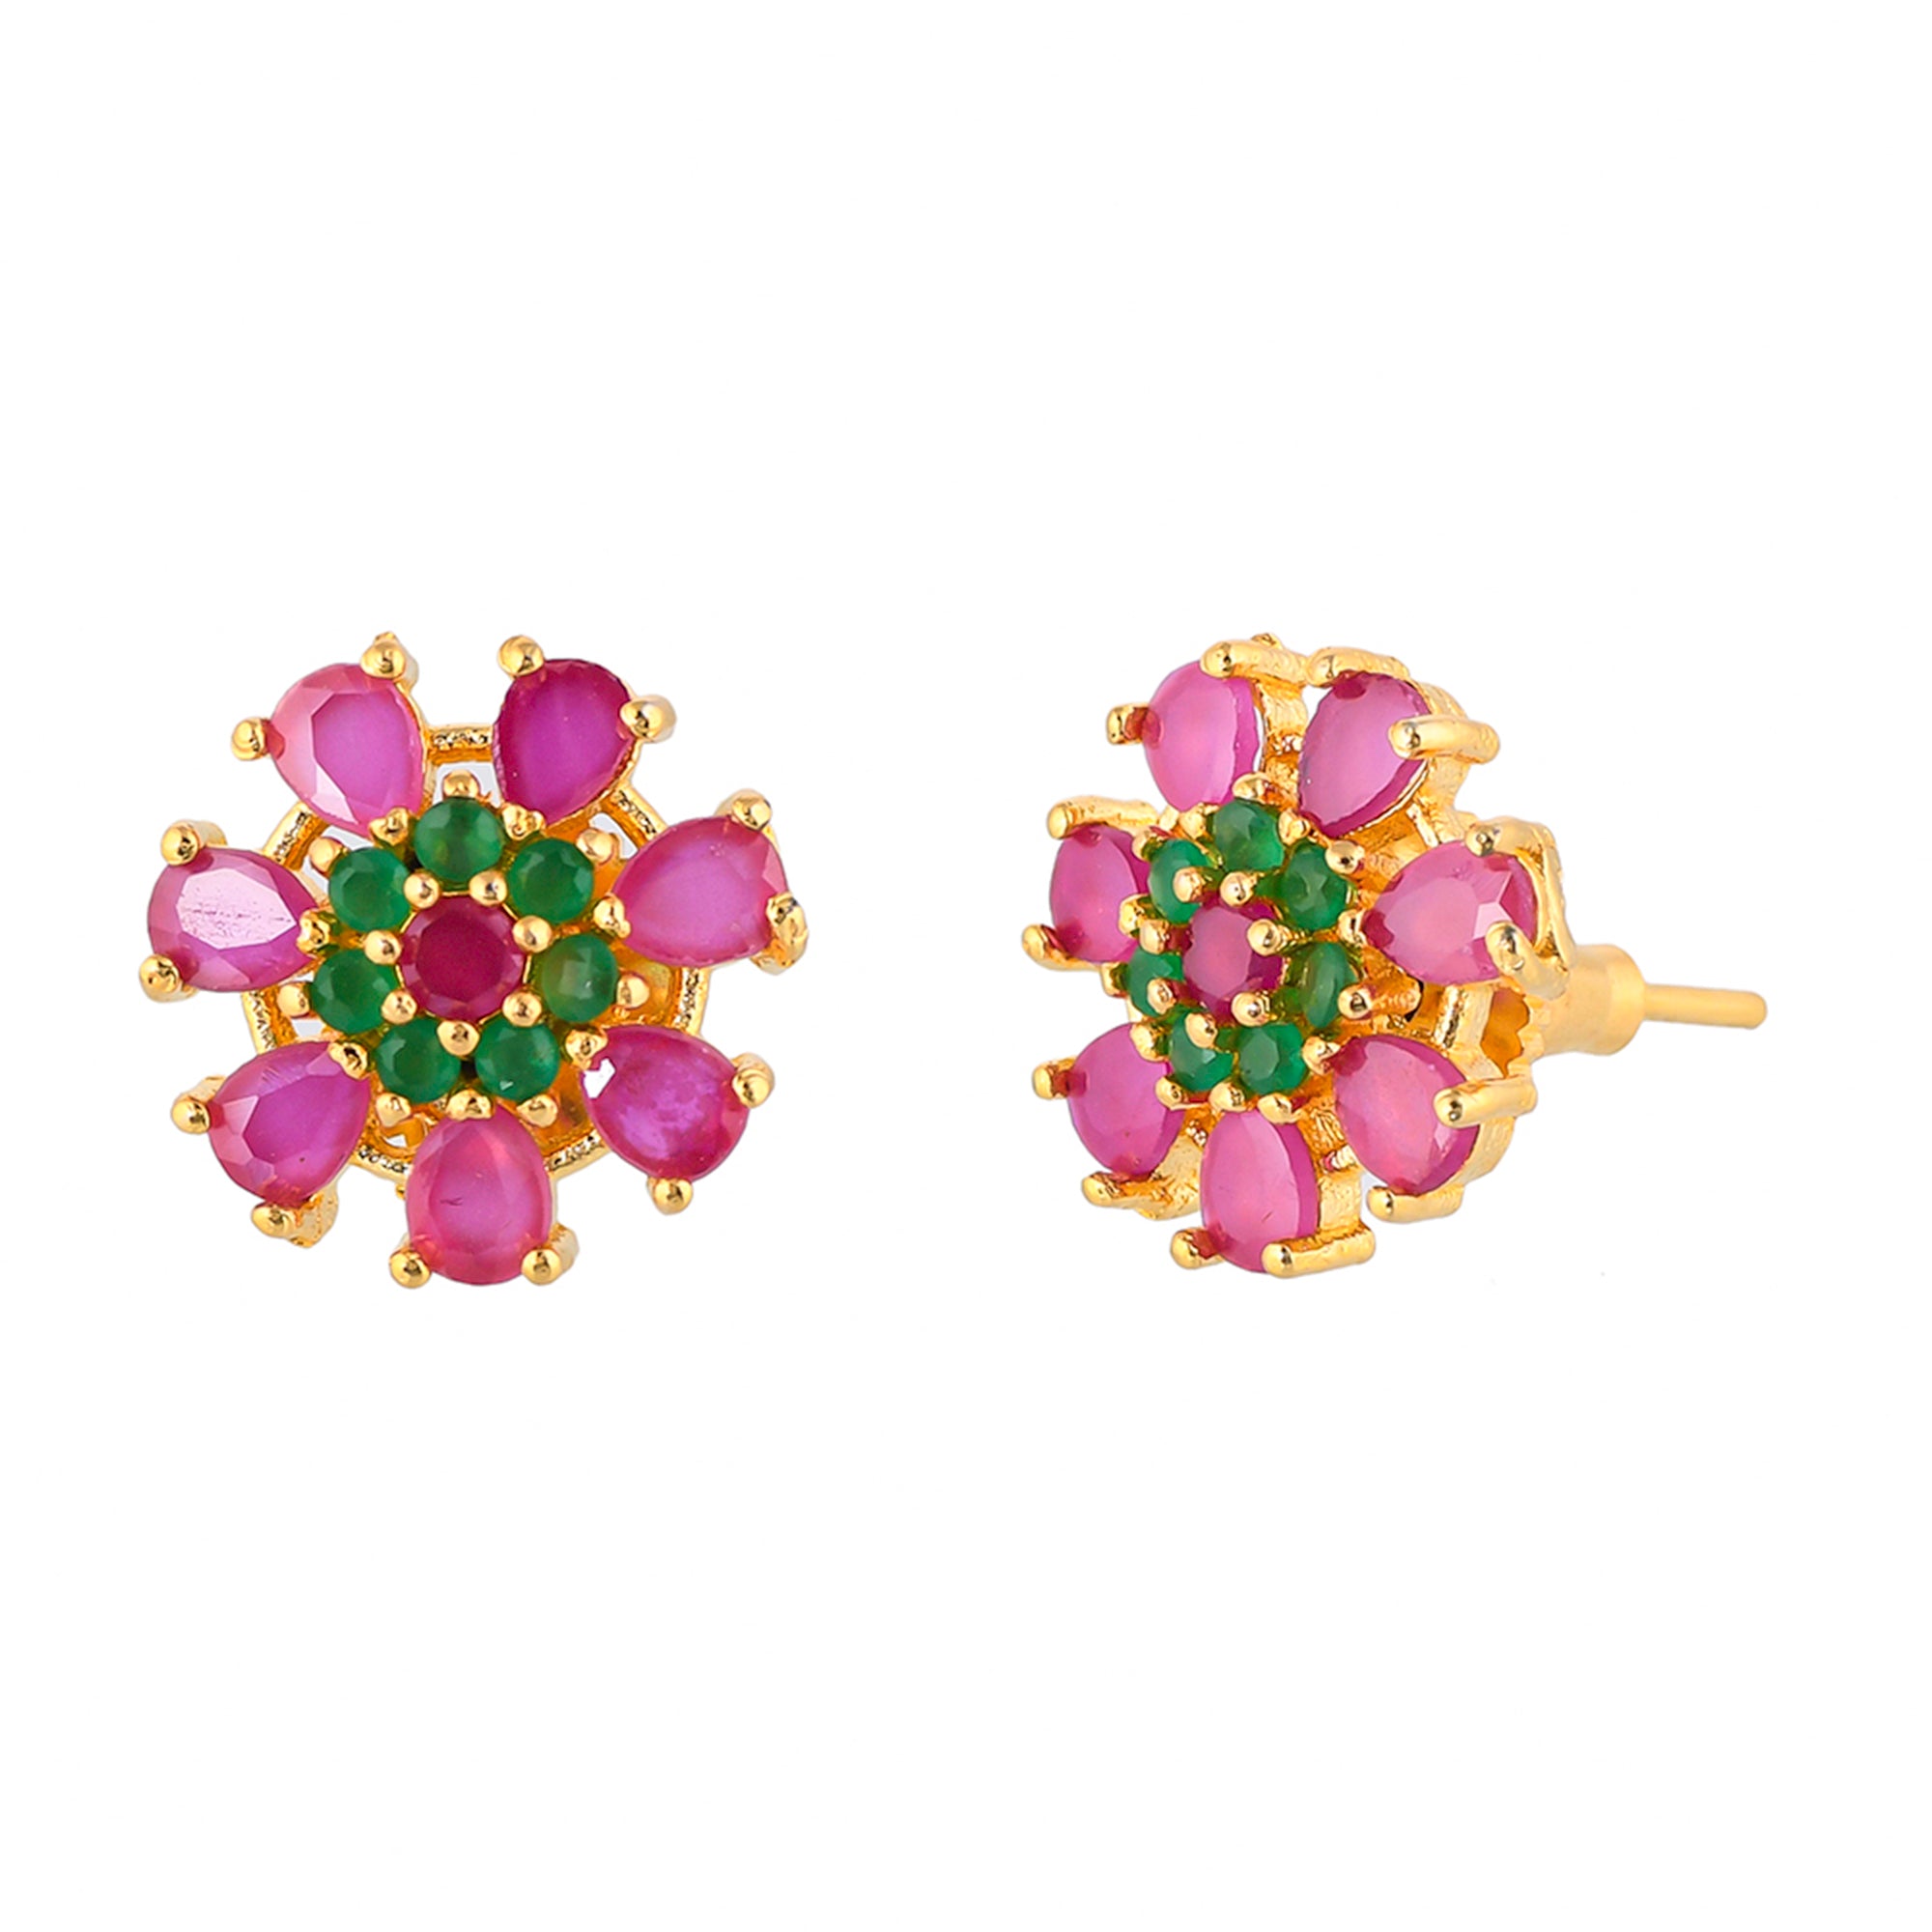 Tiny Pink and Green CZ Gems Stud Earrings